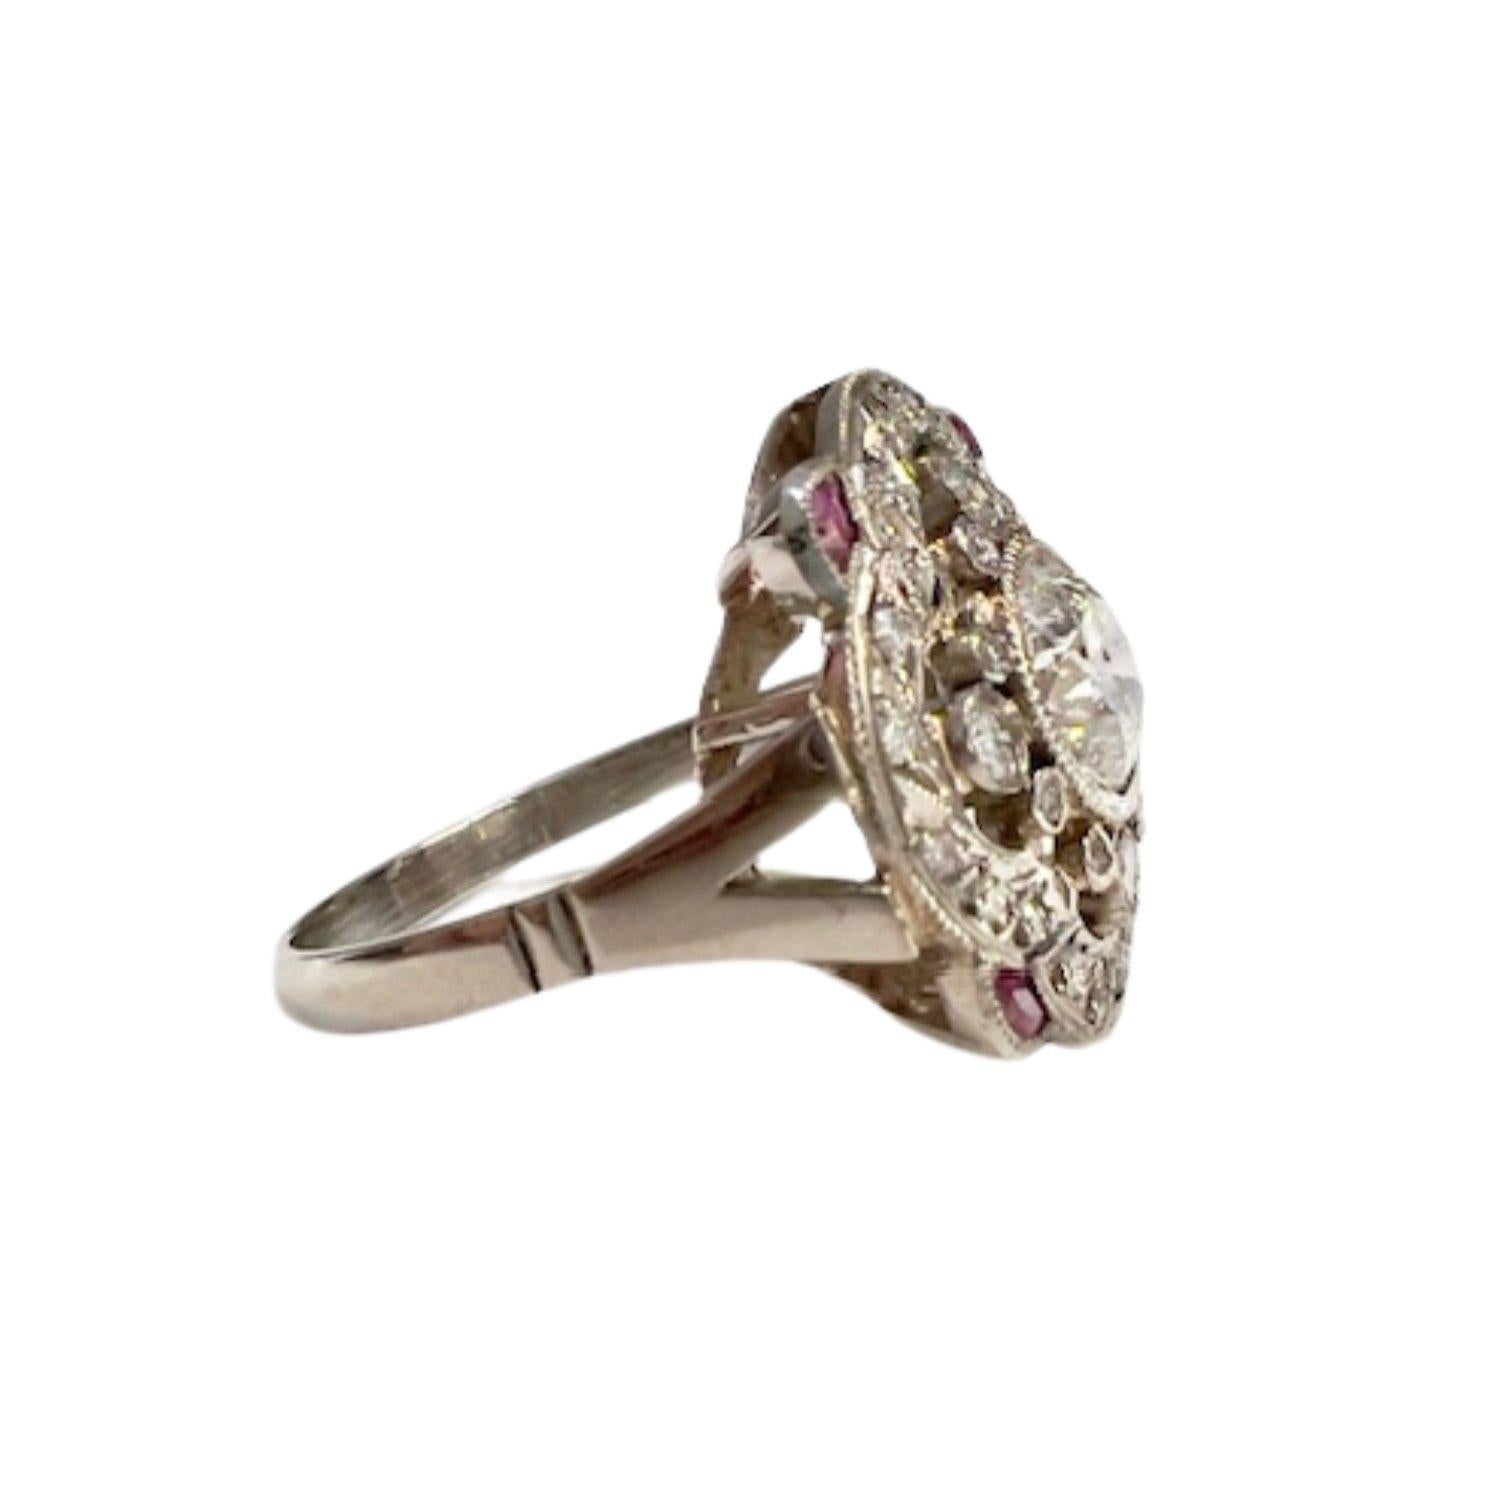 Step into the glamour of the Art Deco era with this exquisite platinum ring adorned with a central diamond and rubies. The central diamond weighs 1.00 carat with PI1 clarity and H color, complemented by brilliant-cut diamonds totaling 0.50 carats.